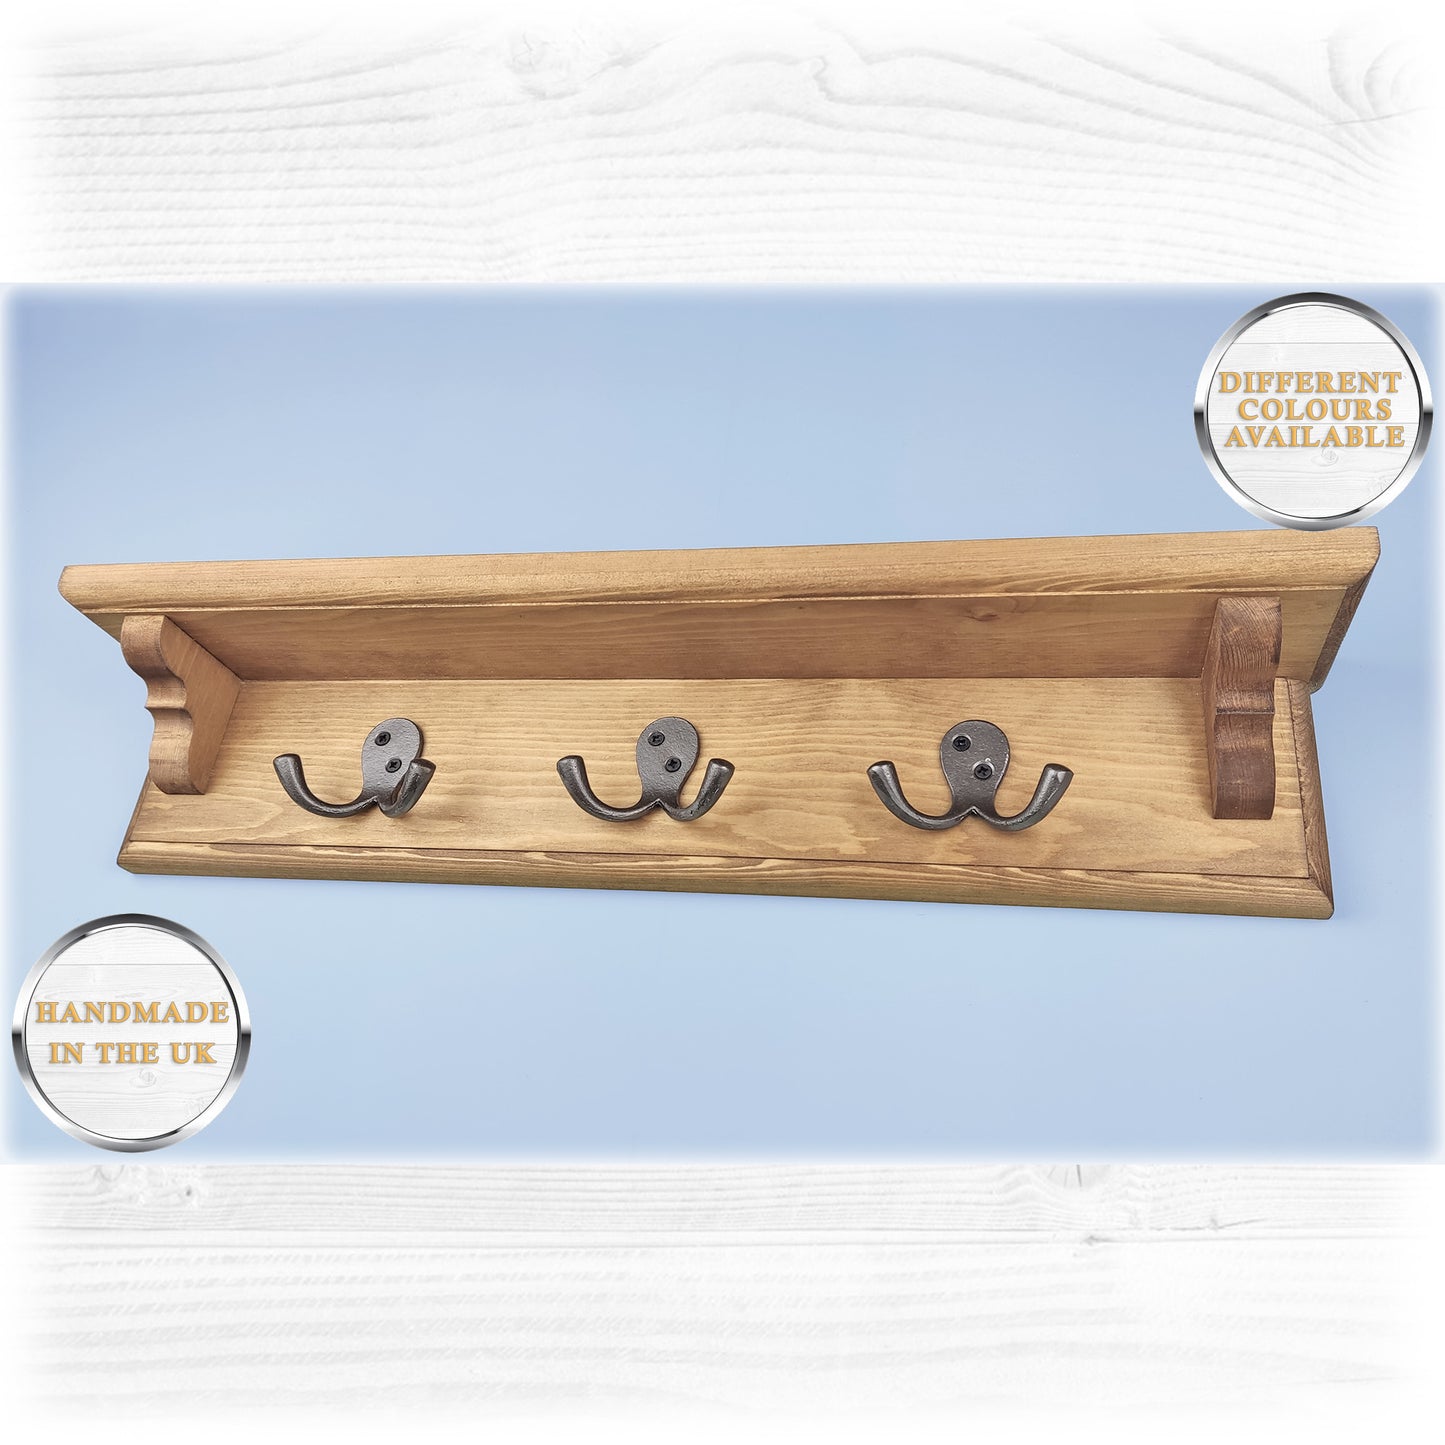 08 - Solid Wooden Coat Rack With Shelf, Double Cast Iron Hooks and